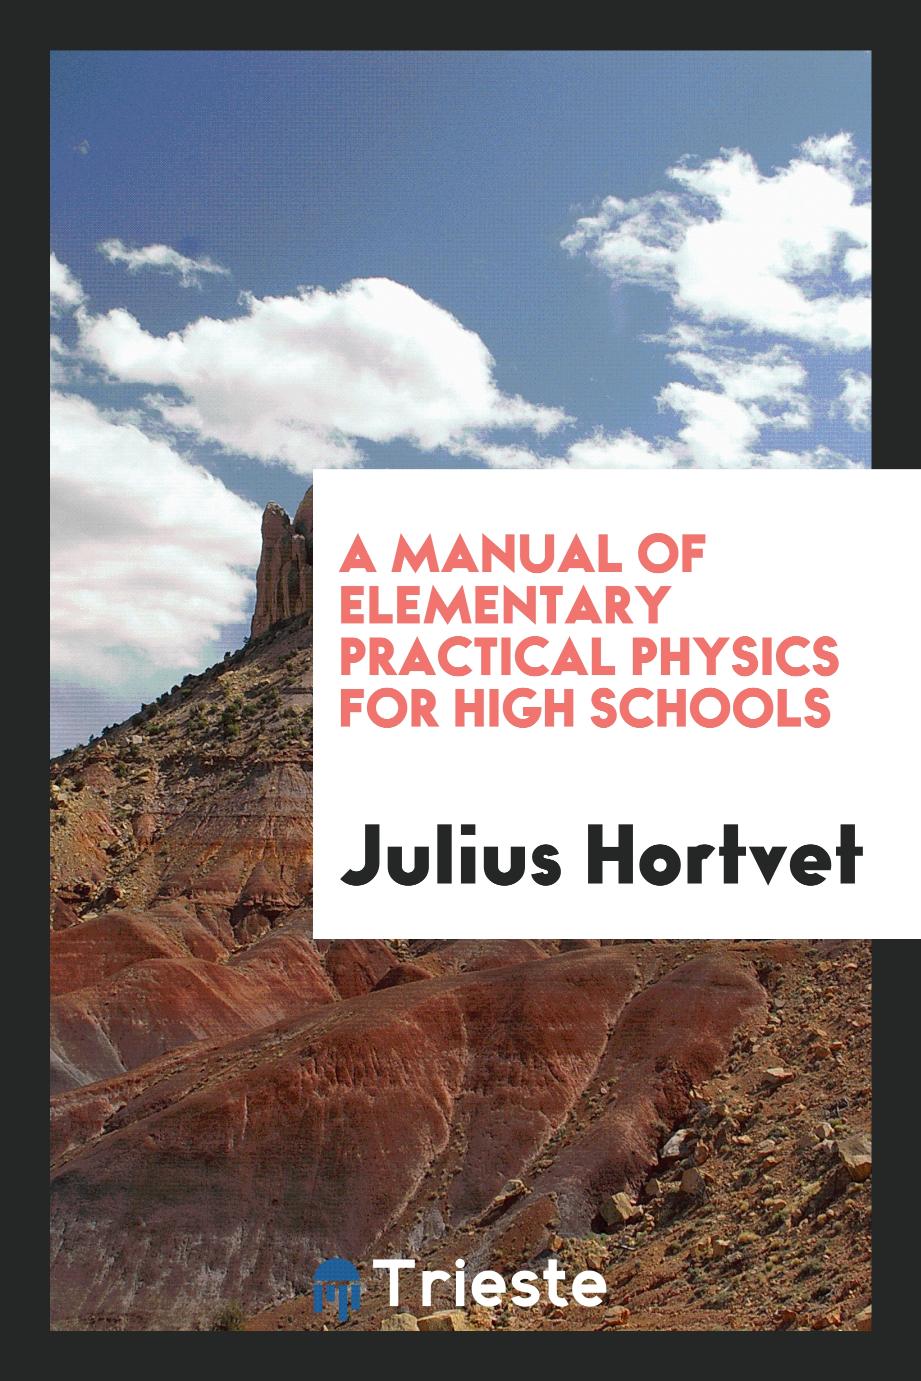 A Manual of Elementary Practical Physics for High Schools